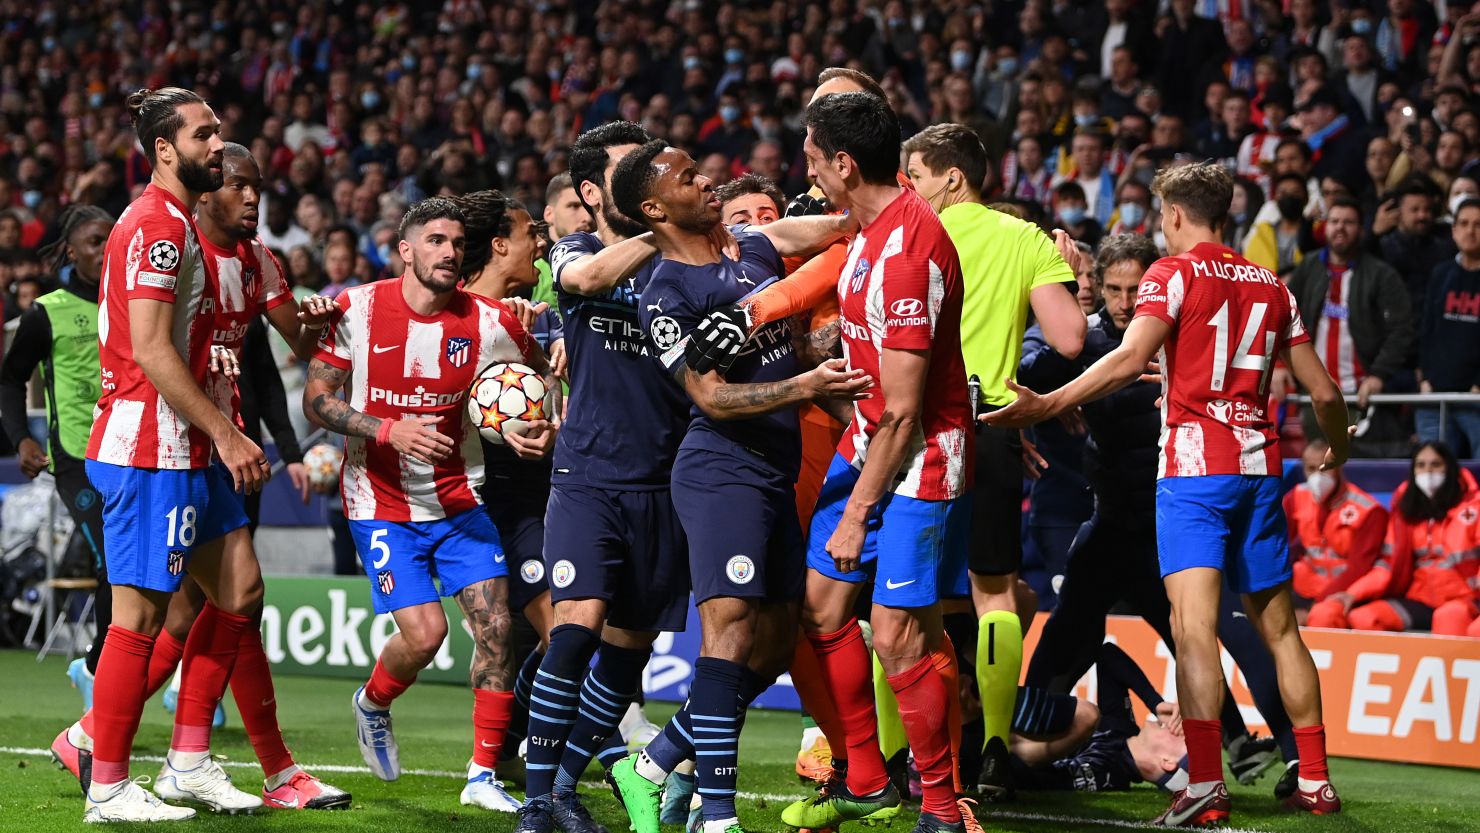 Players clash in the final moments of the Champions League quarterfinal.